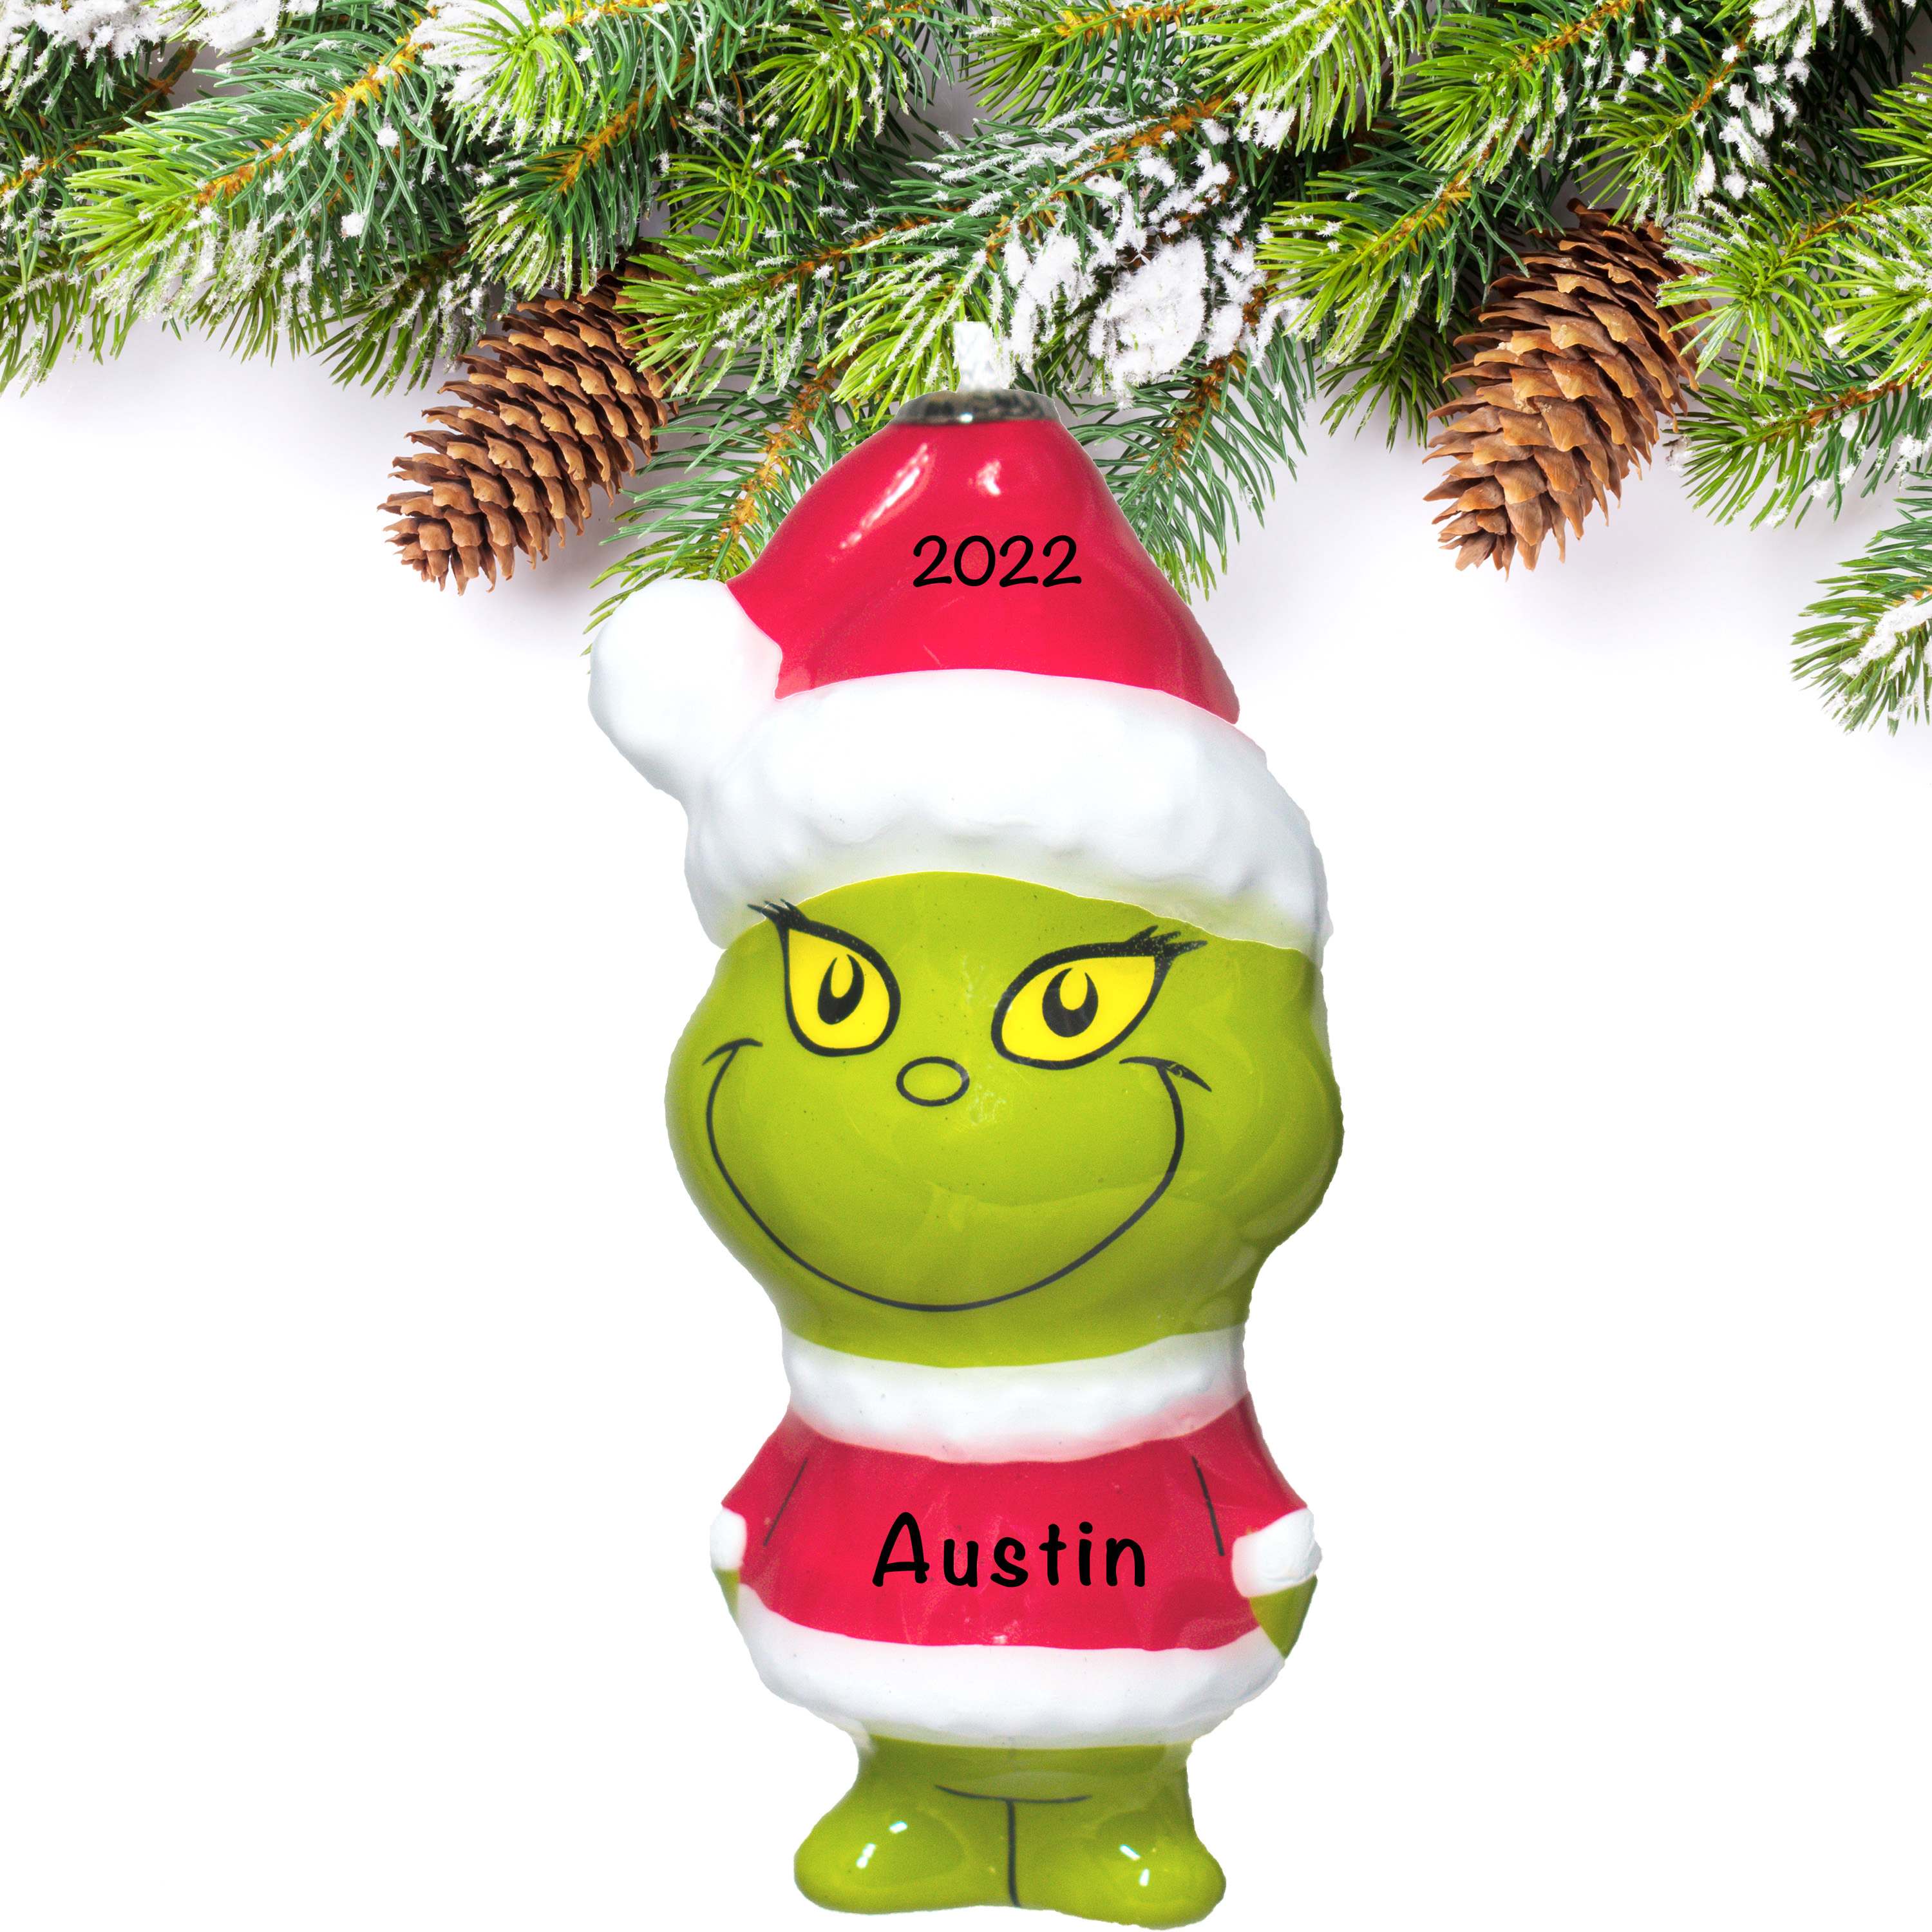 The Grinch Nightmare Before Christmas Personalized Ornament